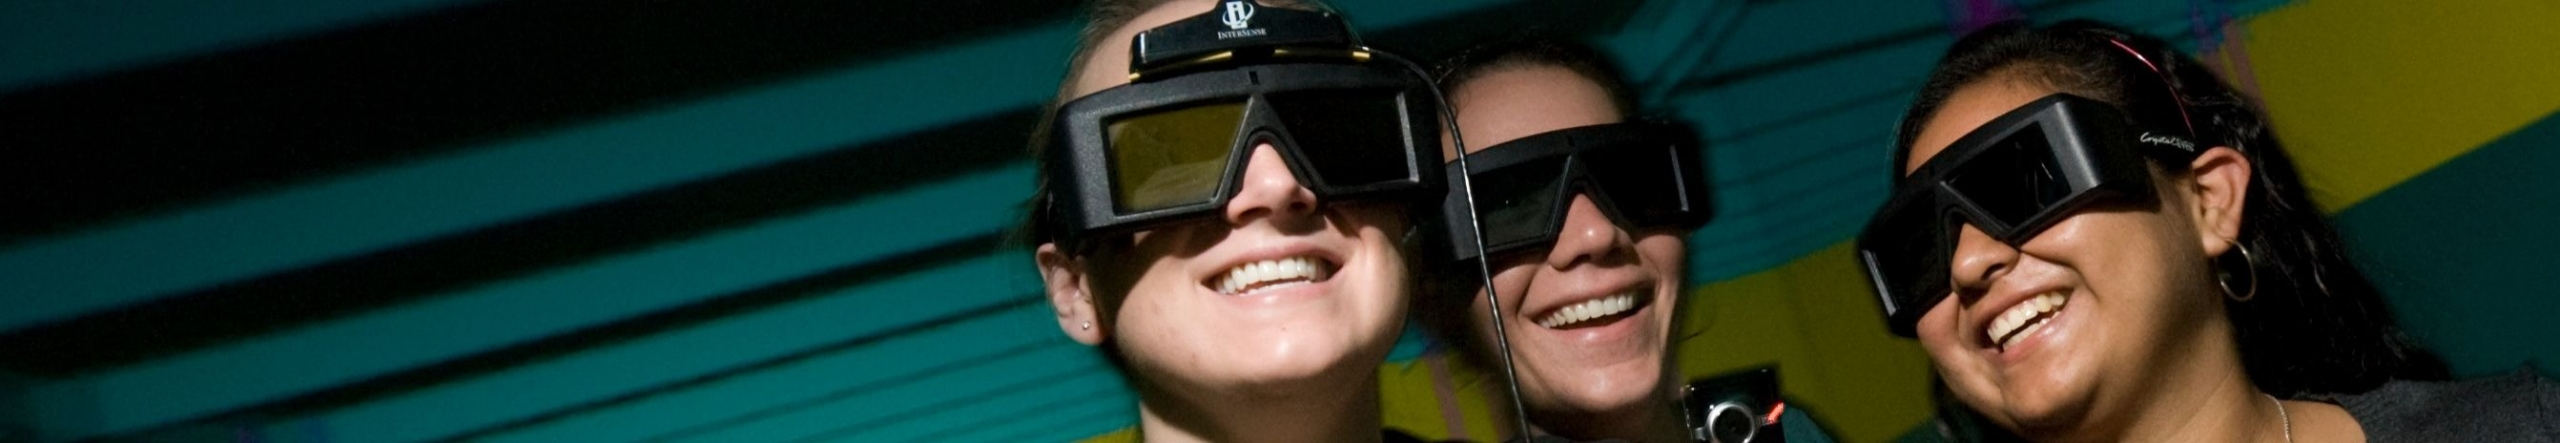 students wearing virtual reality headsets